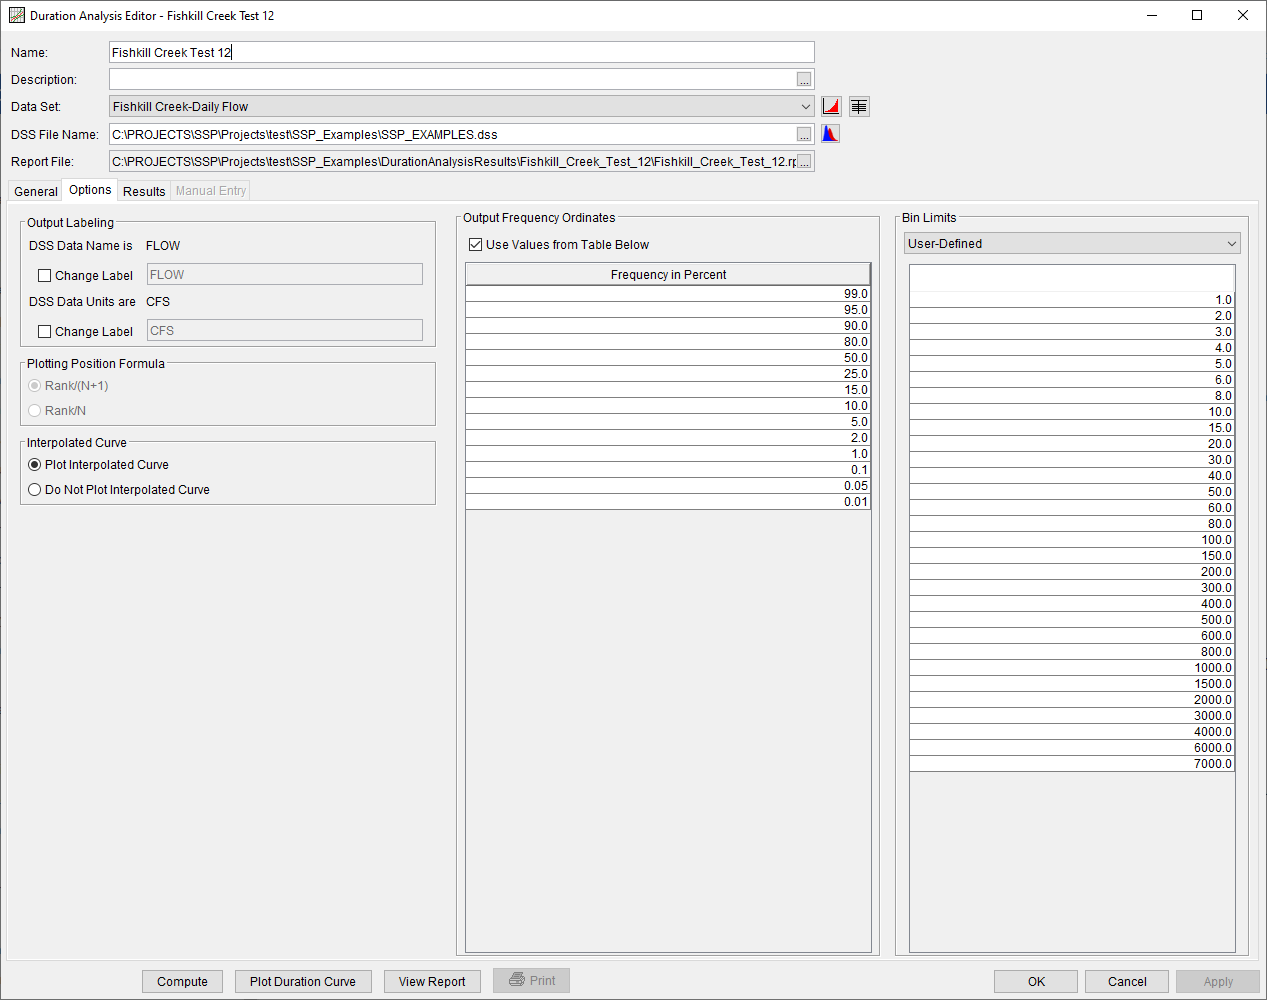 Figure 7. Duration Analysis Editor with Options Tab Selected.